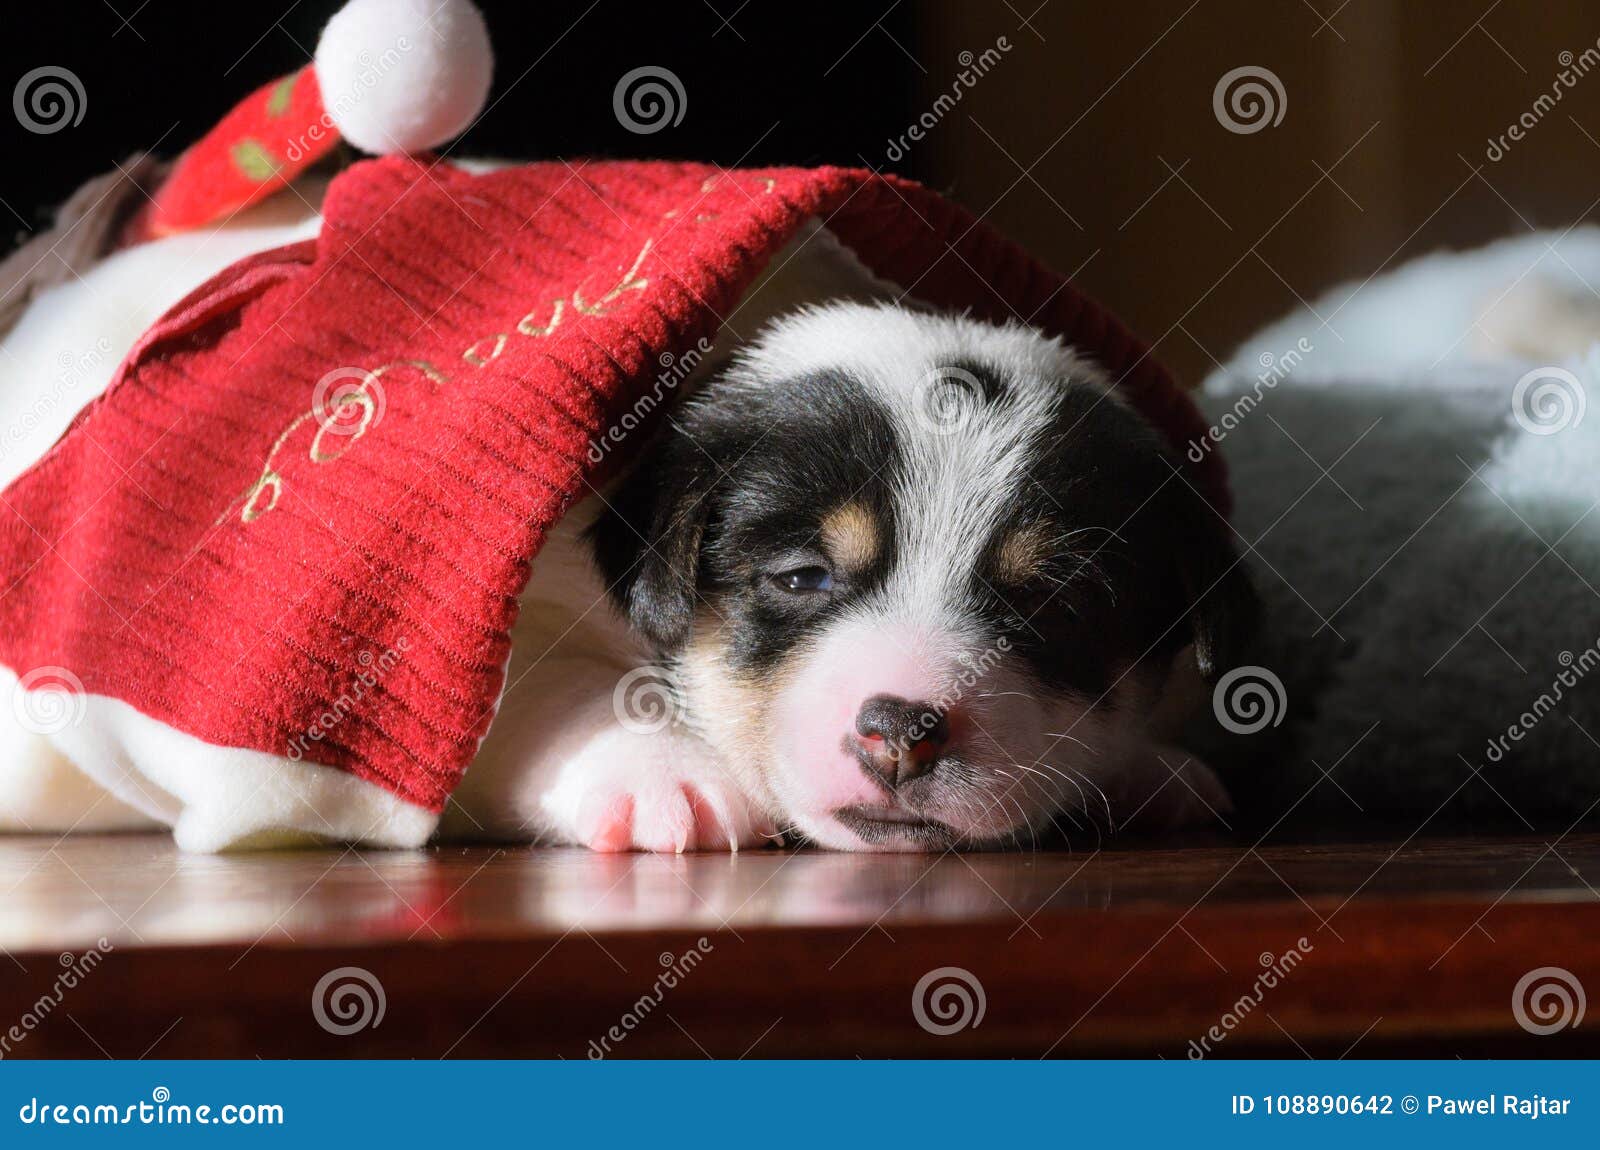 A Small Puppy Jack Russell Terrier Opened His Eyes For The First Time And Sees The World On The Eyes The Dog Is Lying On A Soft Stock Photo Image Of,Sausage Gravy Stuffed Biscuits